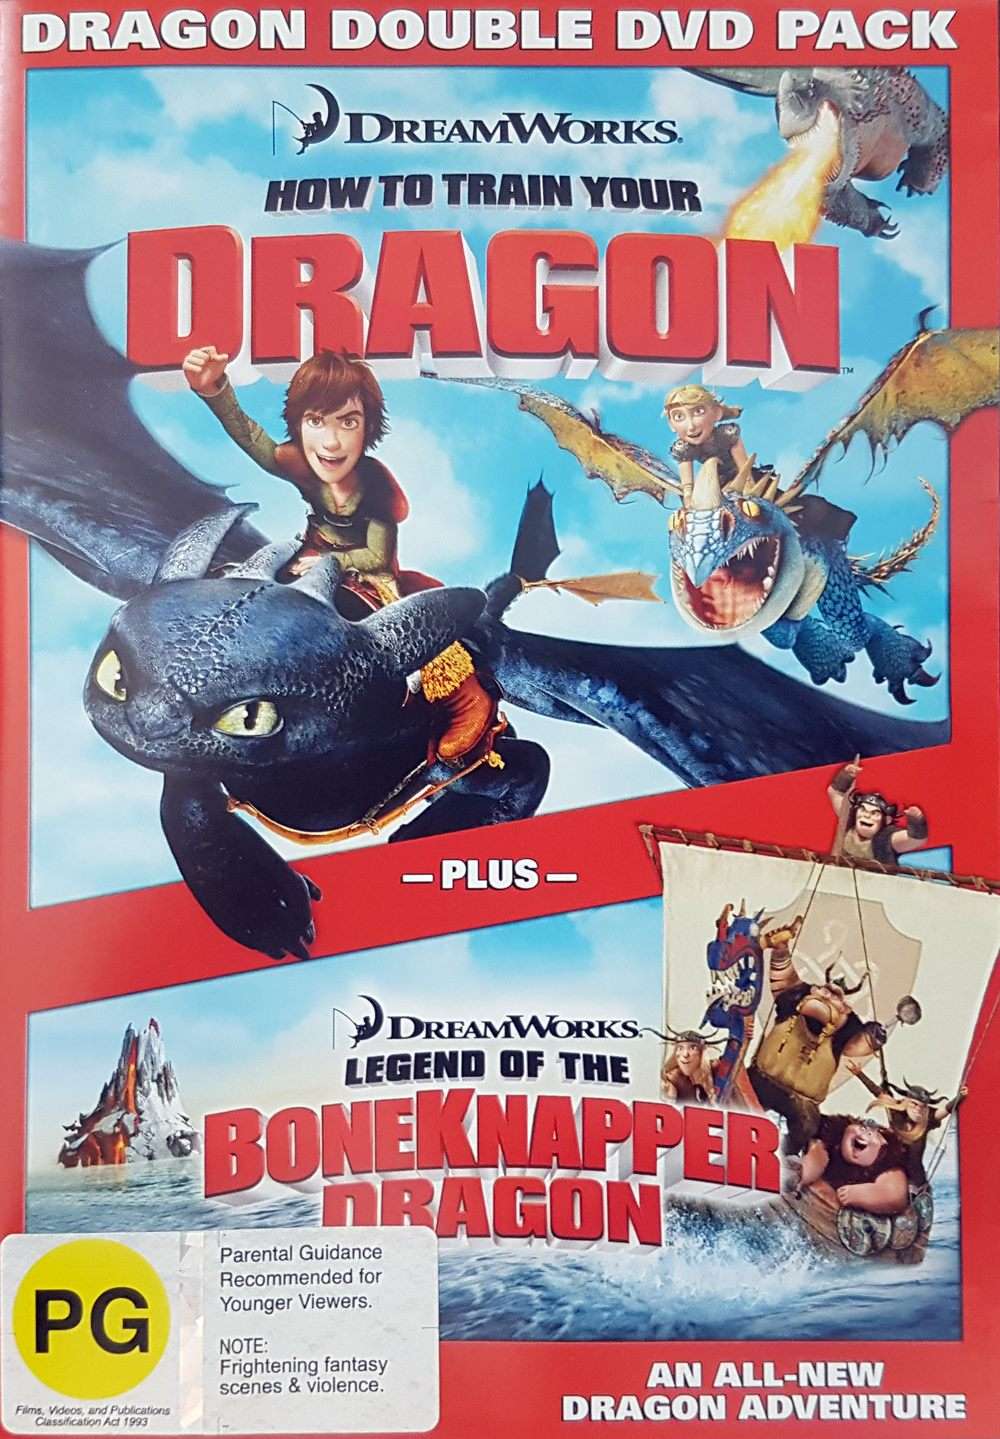 How to Train Your Dragon & Legend of the Boneknapper Dragon